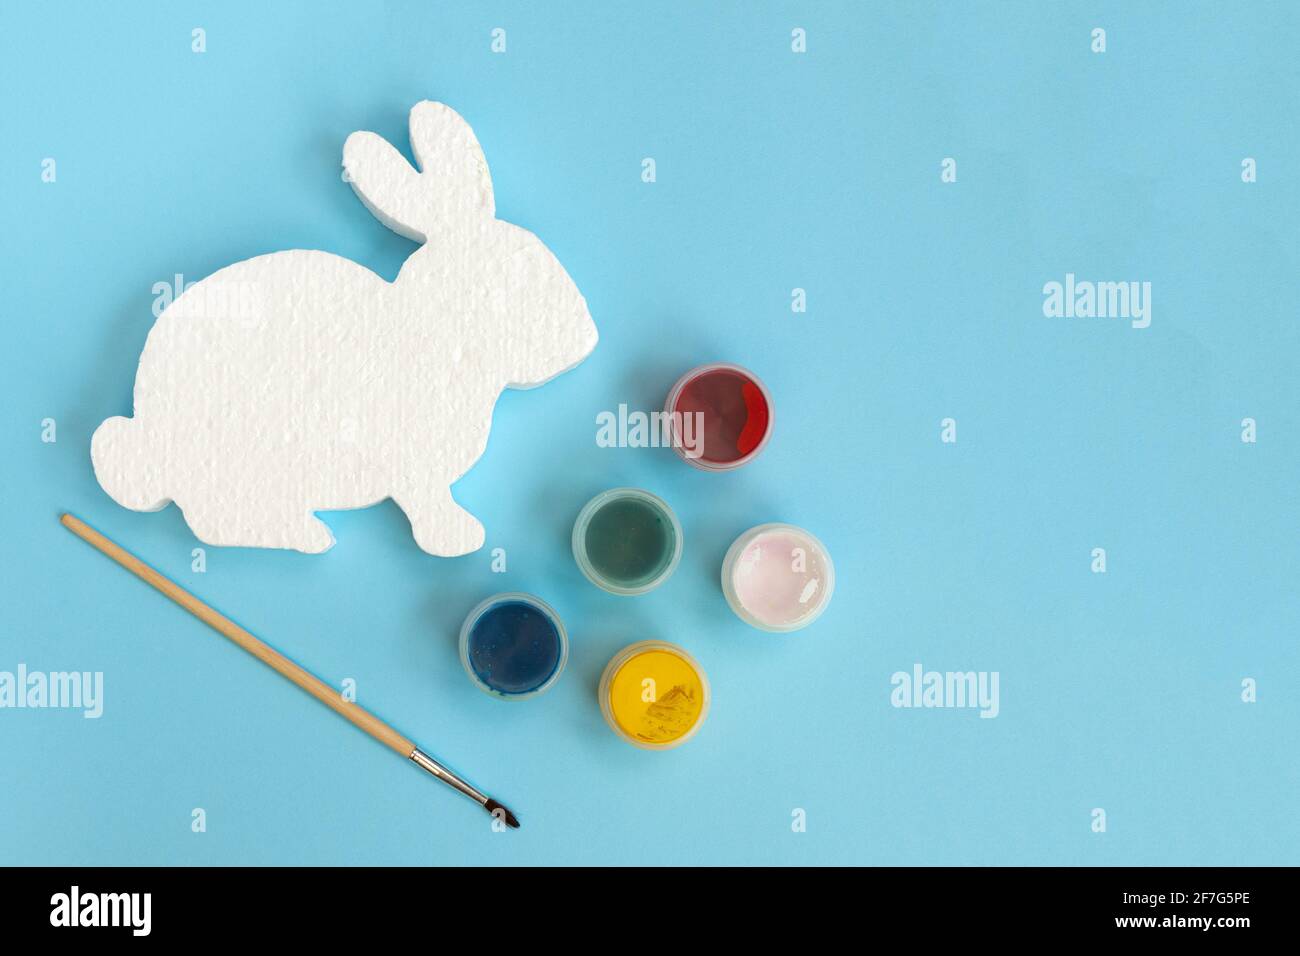 White figure of bunny or rabbit for decorating, paints and brushe on blue background. Easter diy with children. Top view with copy space. Stock Photo